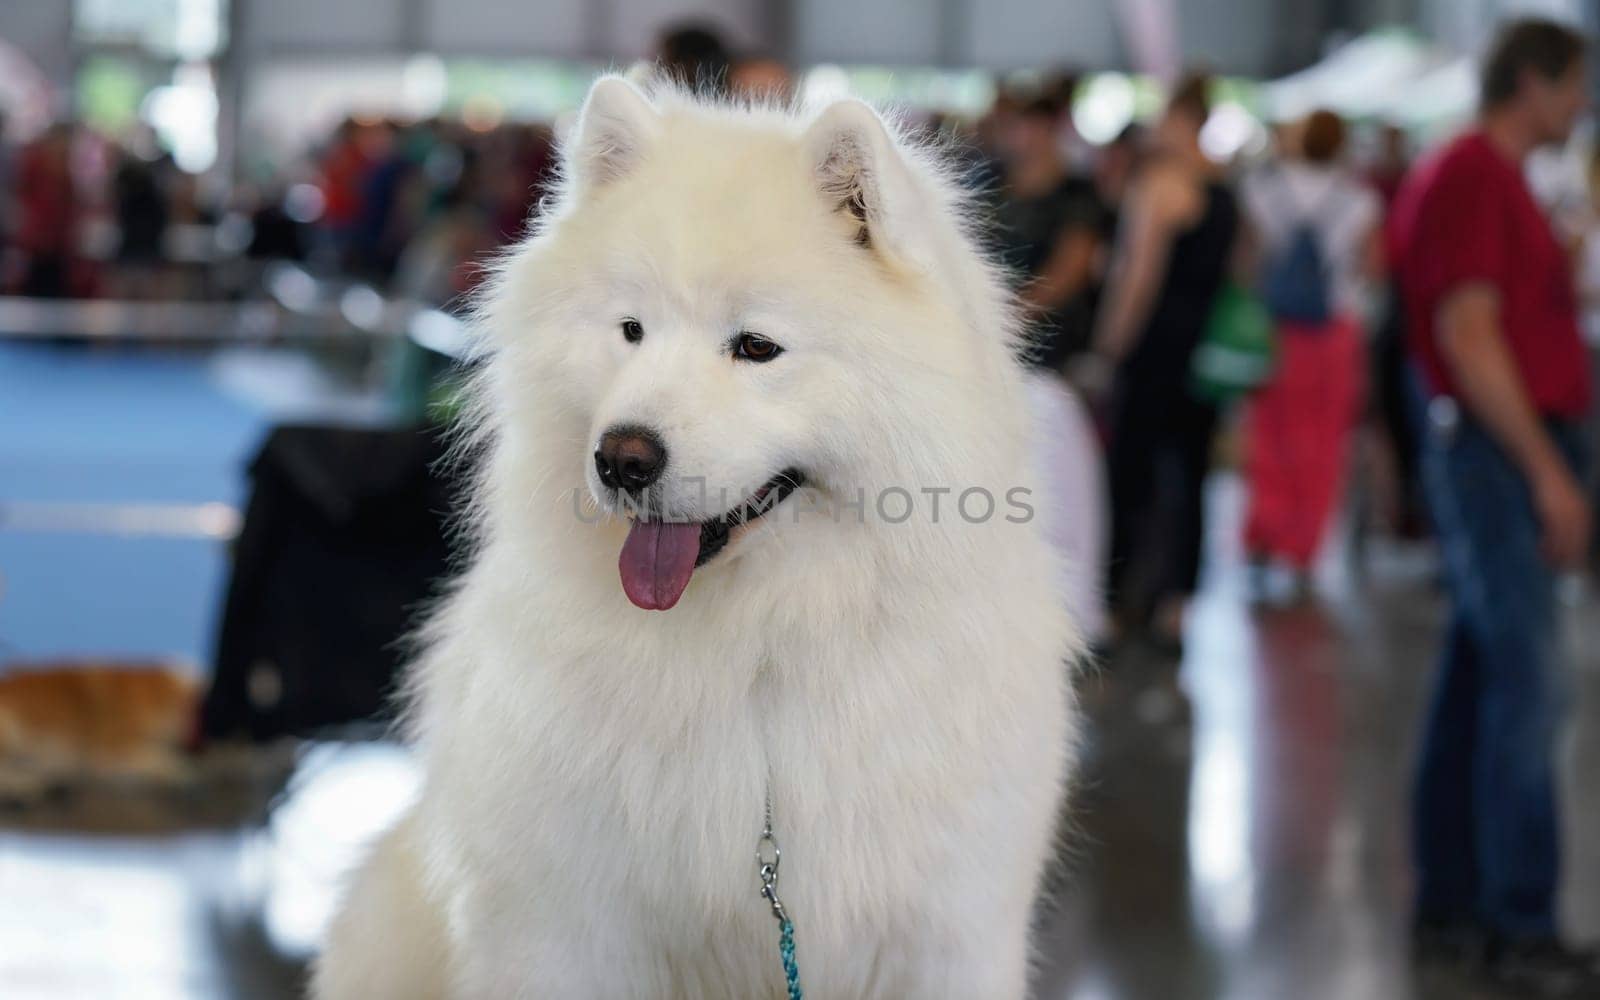 White Samoyed aka. Bjelkier spitz type dog breed, closeup on head, tongue sticking out, blurred people indoors in background